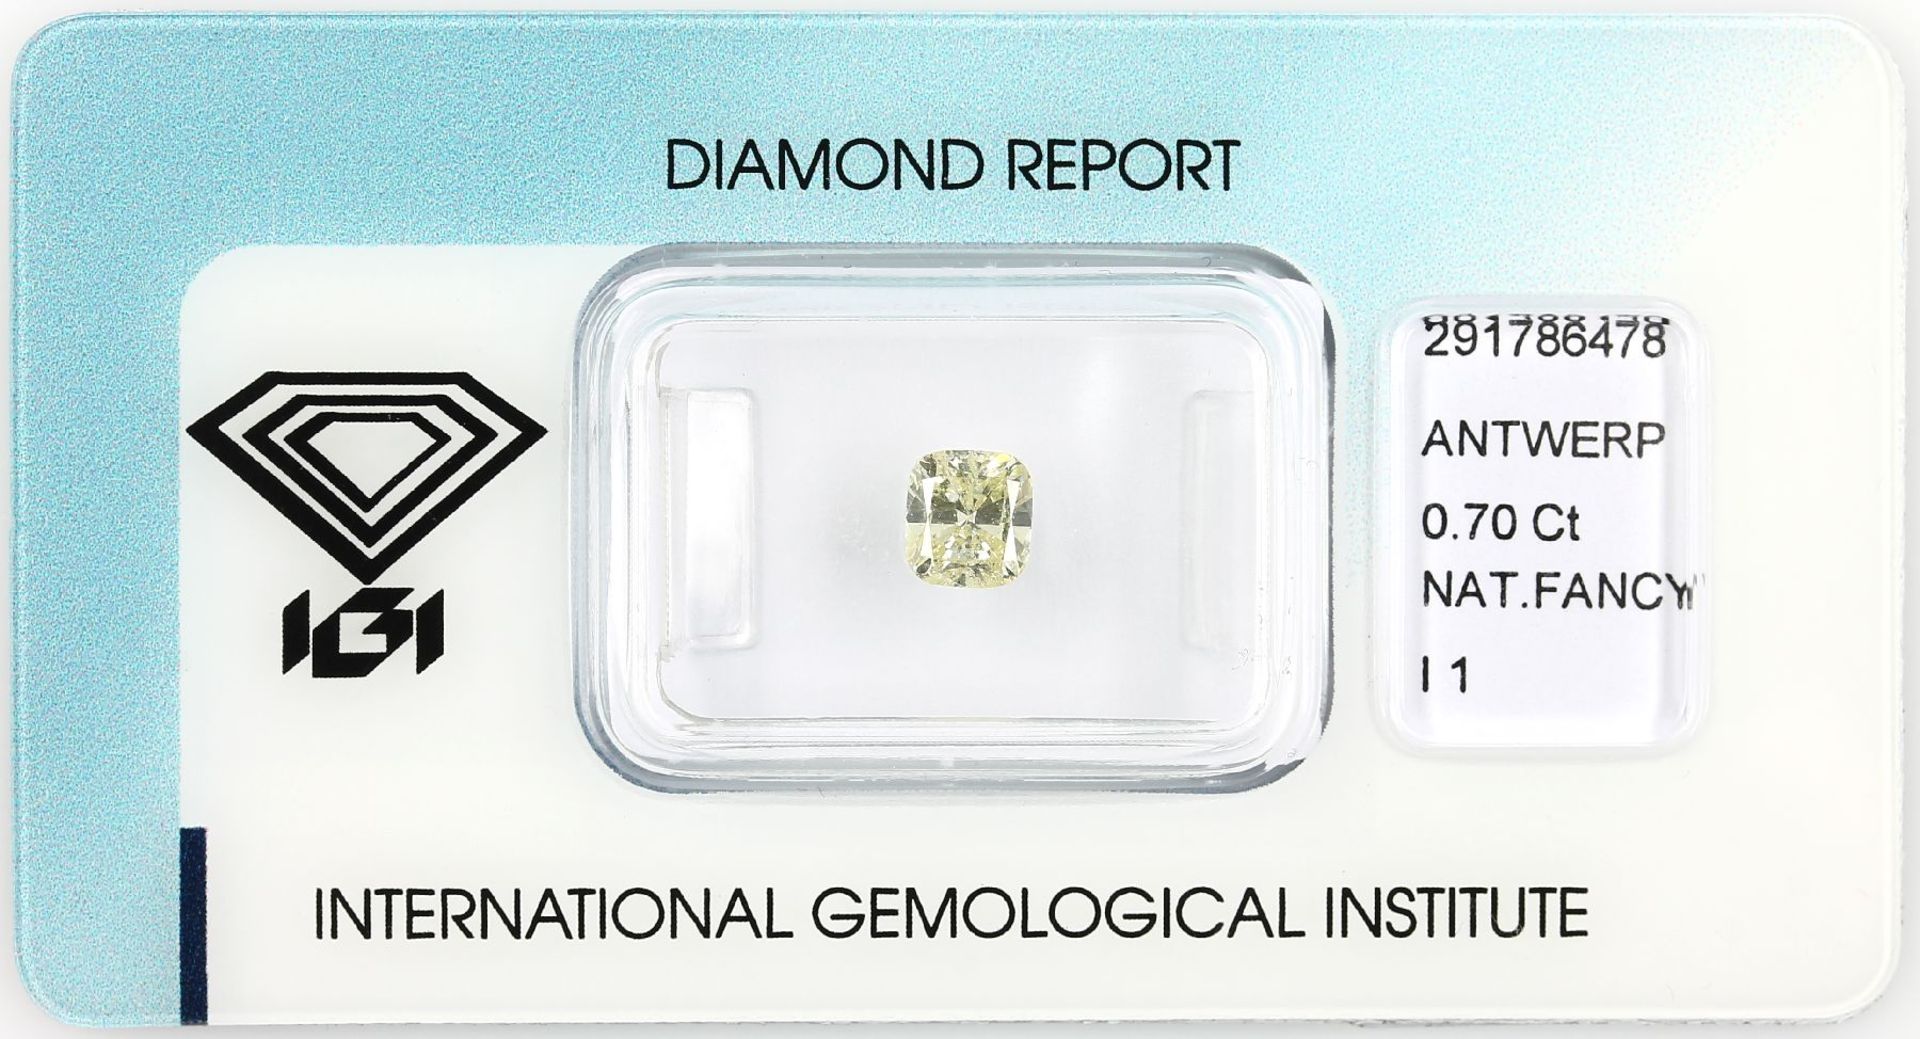 Loser Diamant, 0.70 ct, 5.38 x 4.95 x 3.22 mm, natural fancy yellow/p1, cushion modified